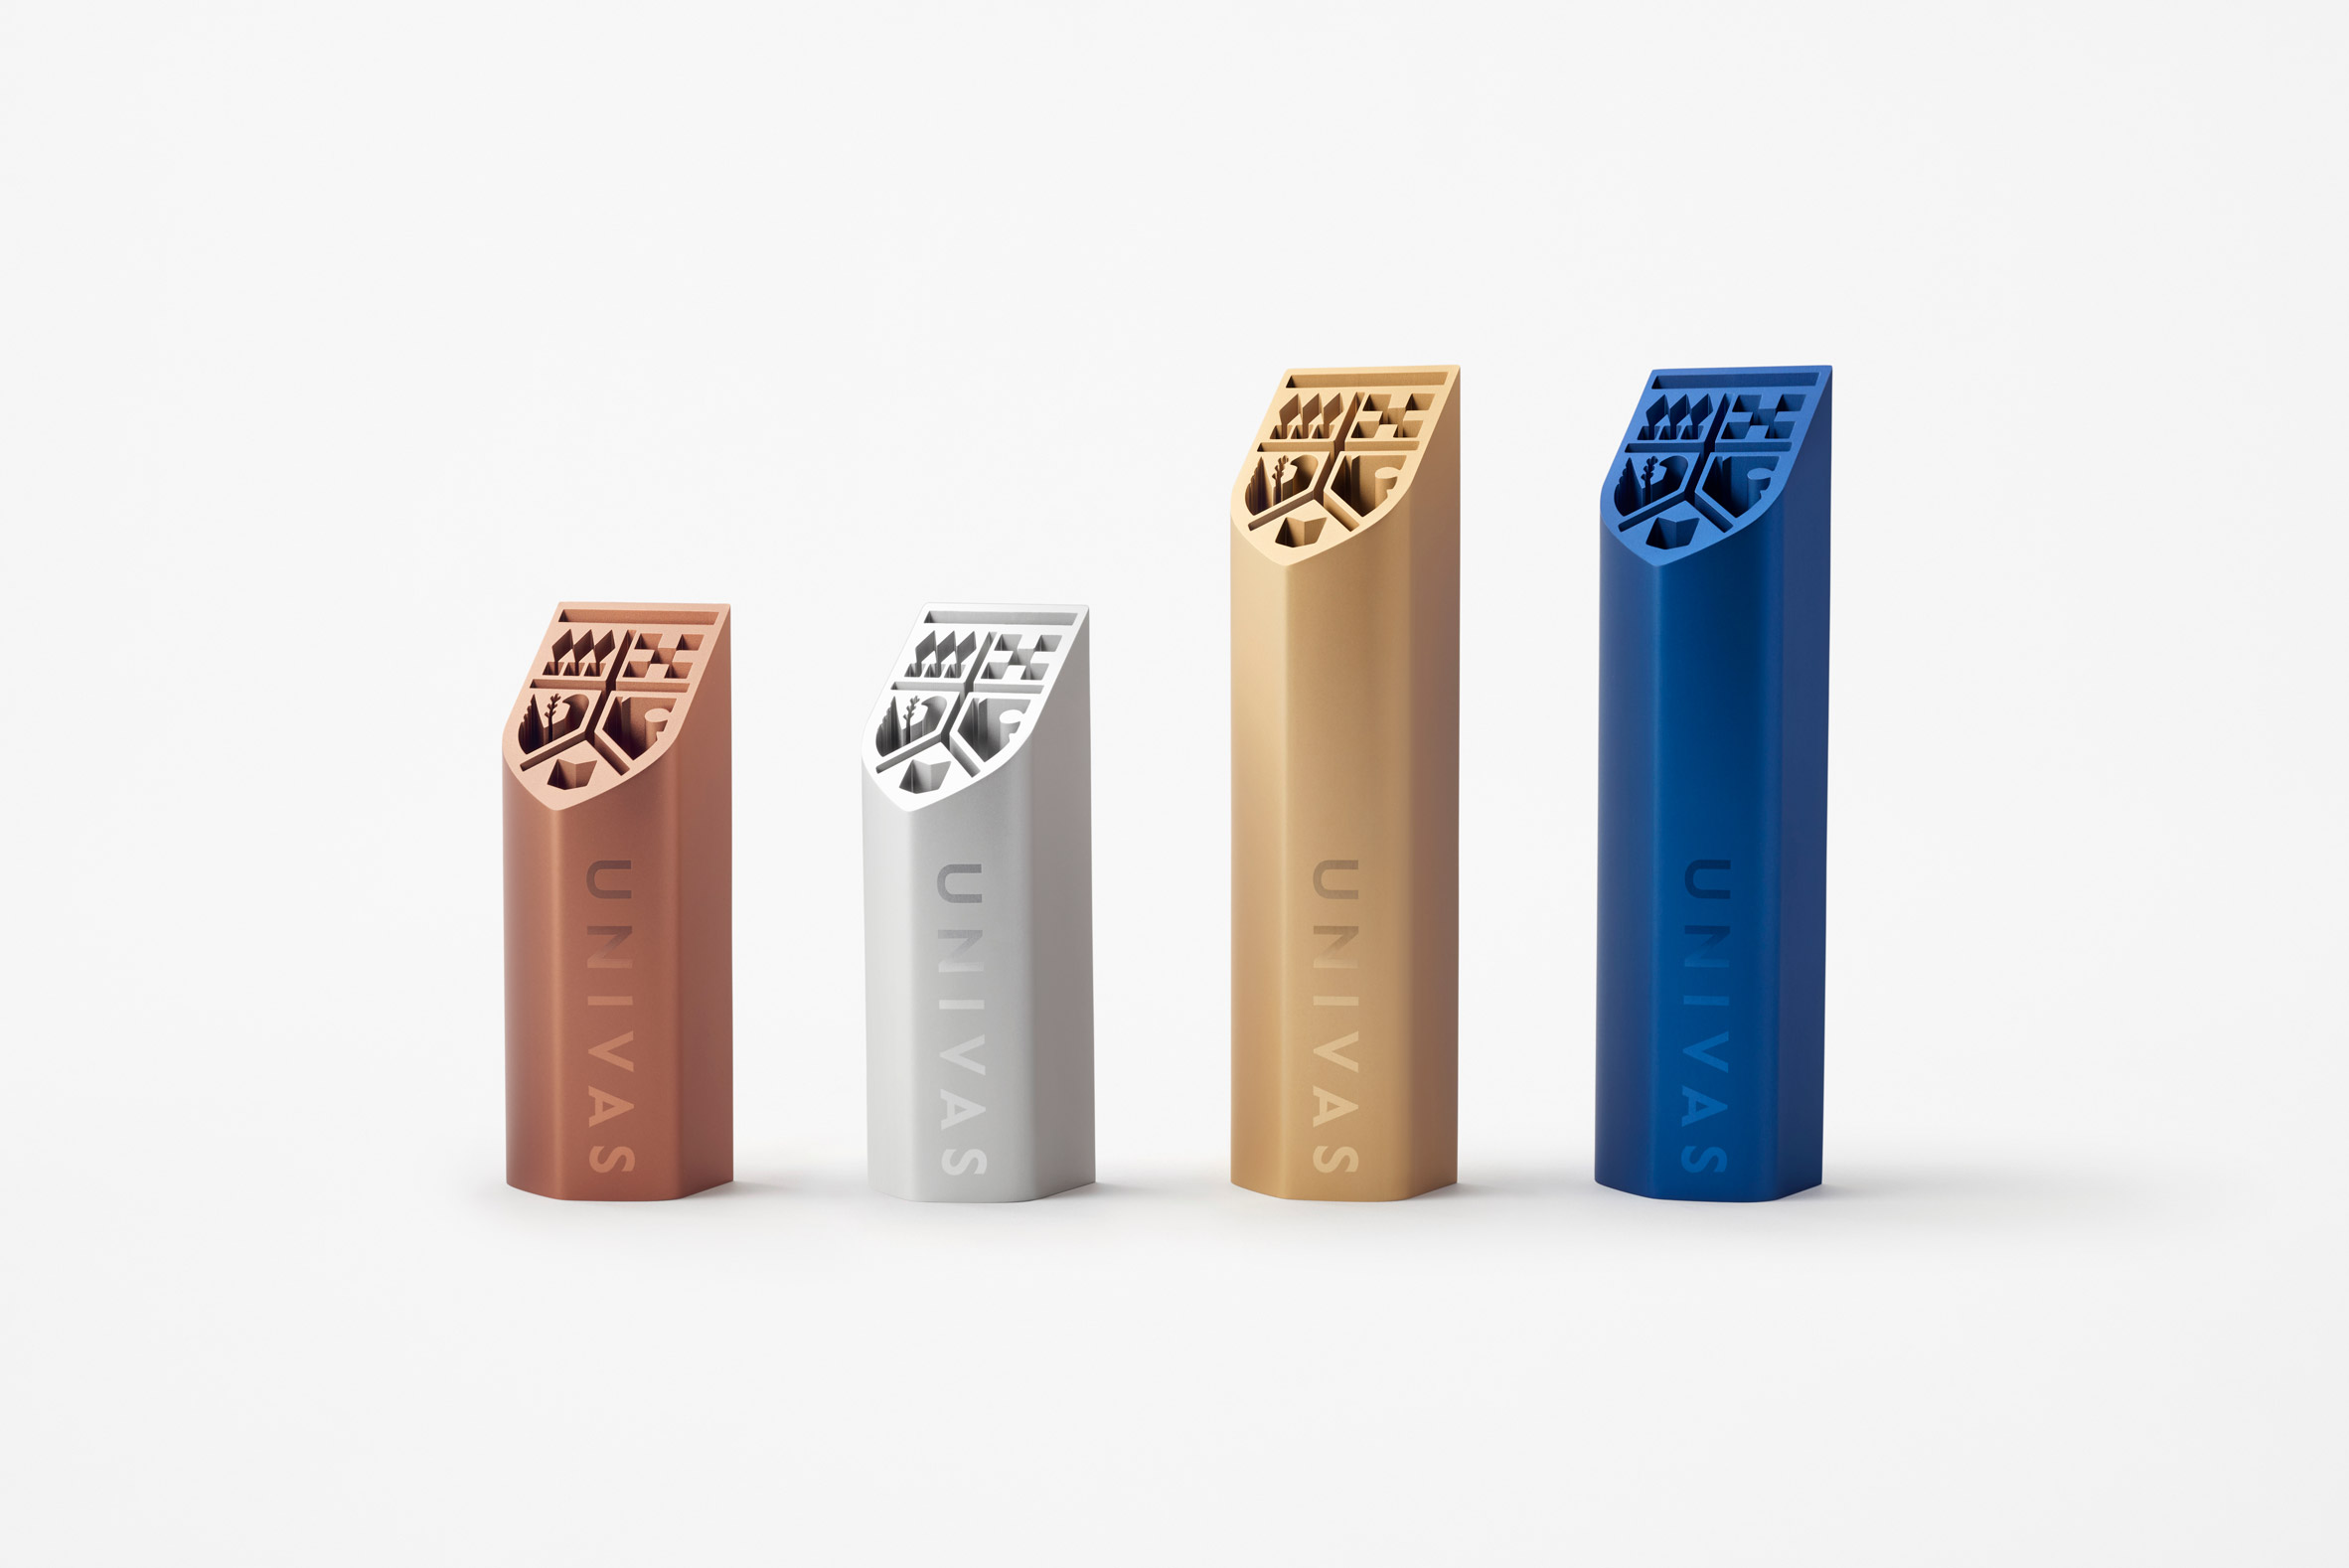 Awards trophies by Nendo for UNIVAS